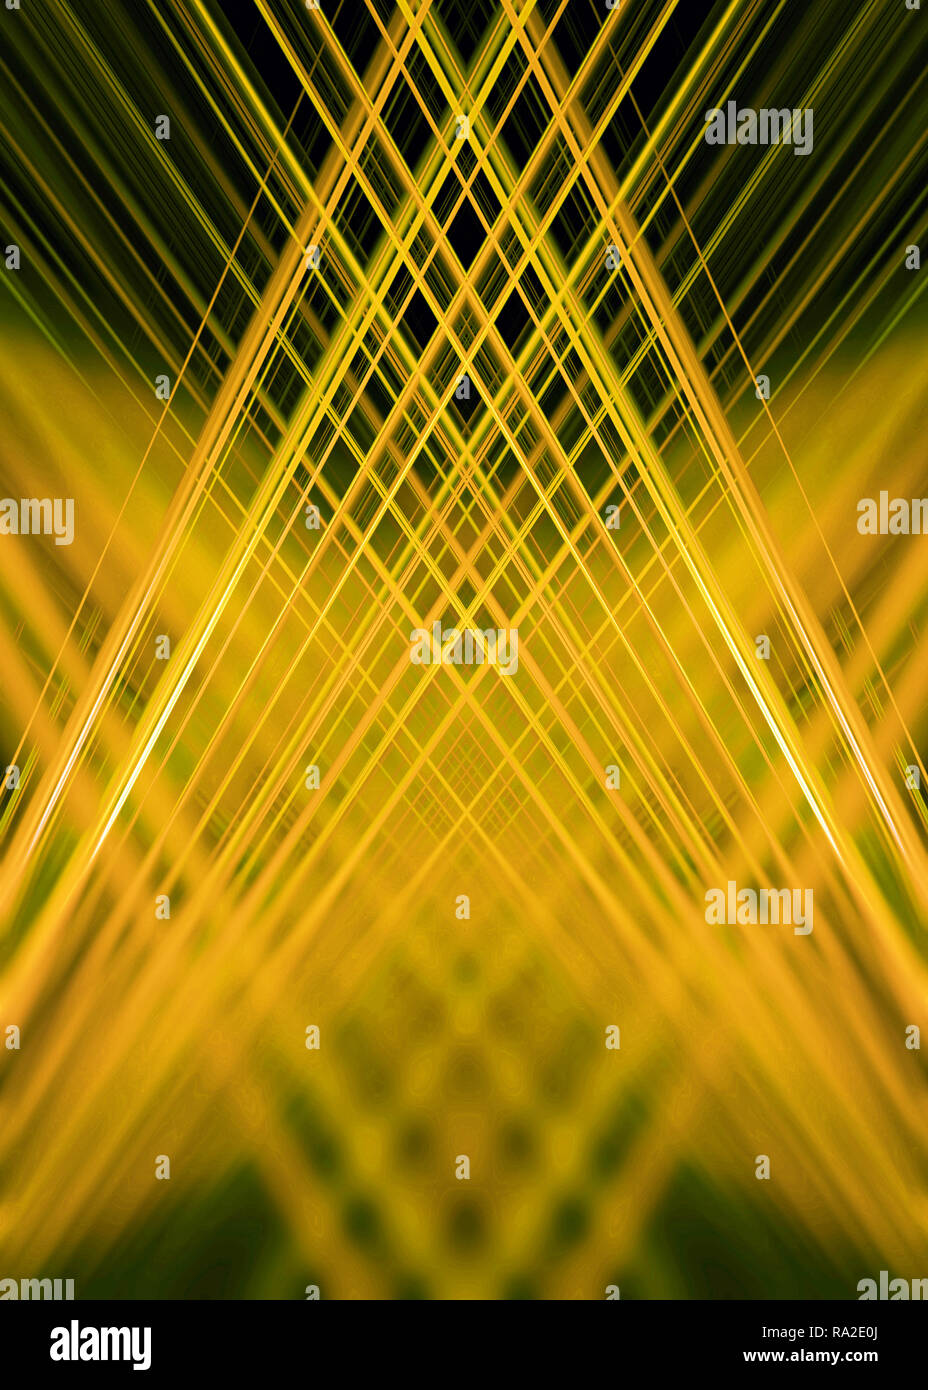 Abstract gold on black overlapping light trails background Stock Photo